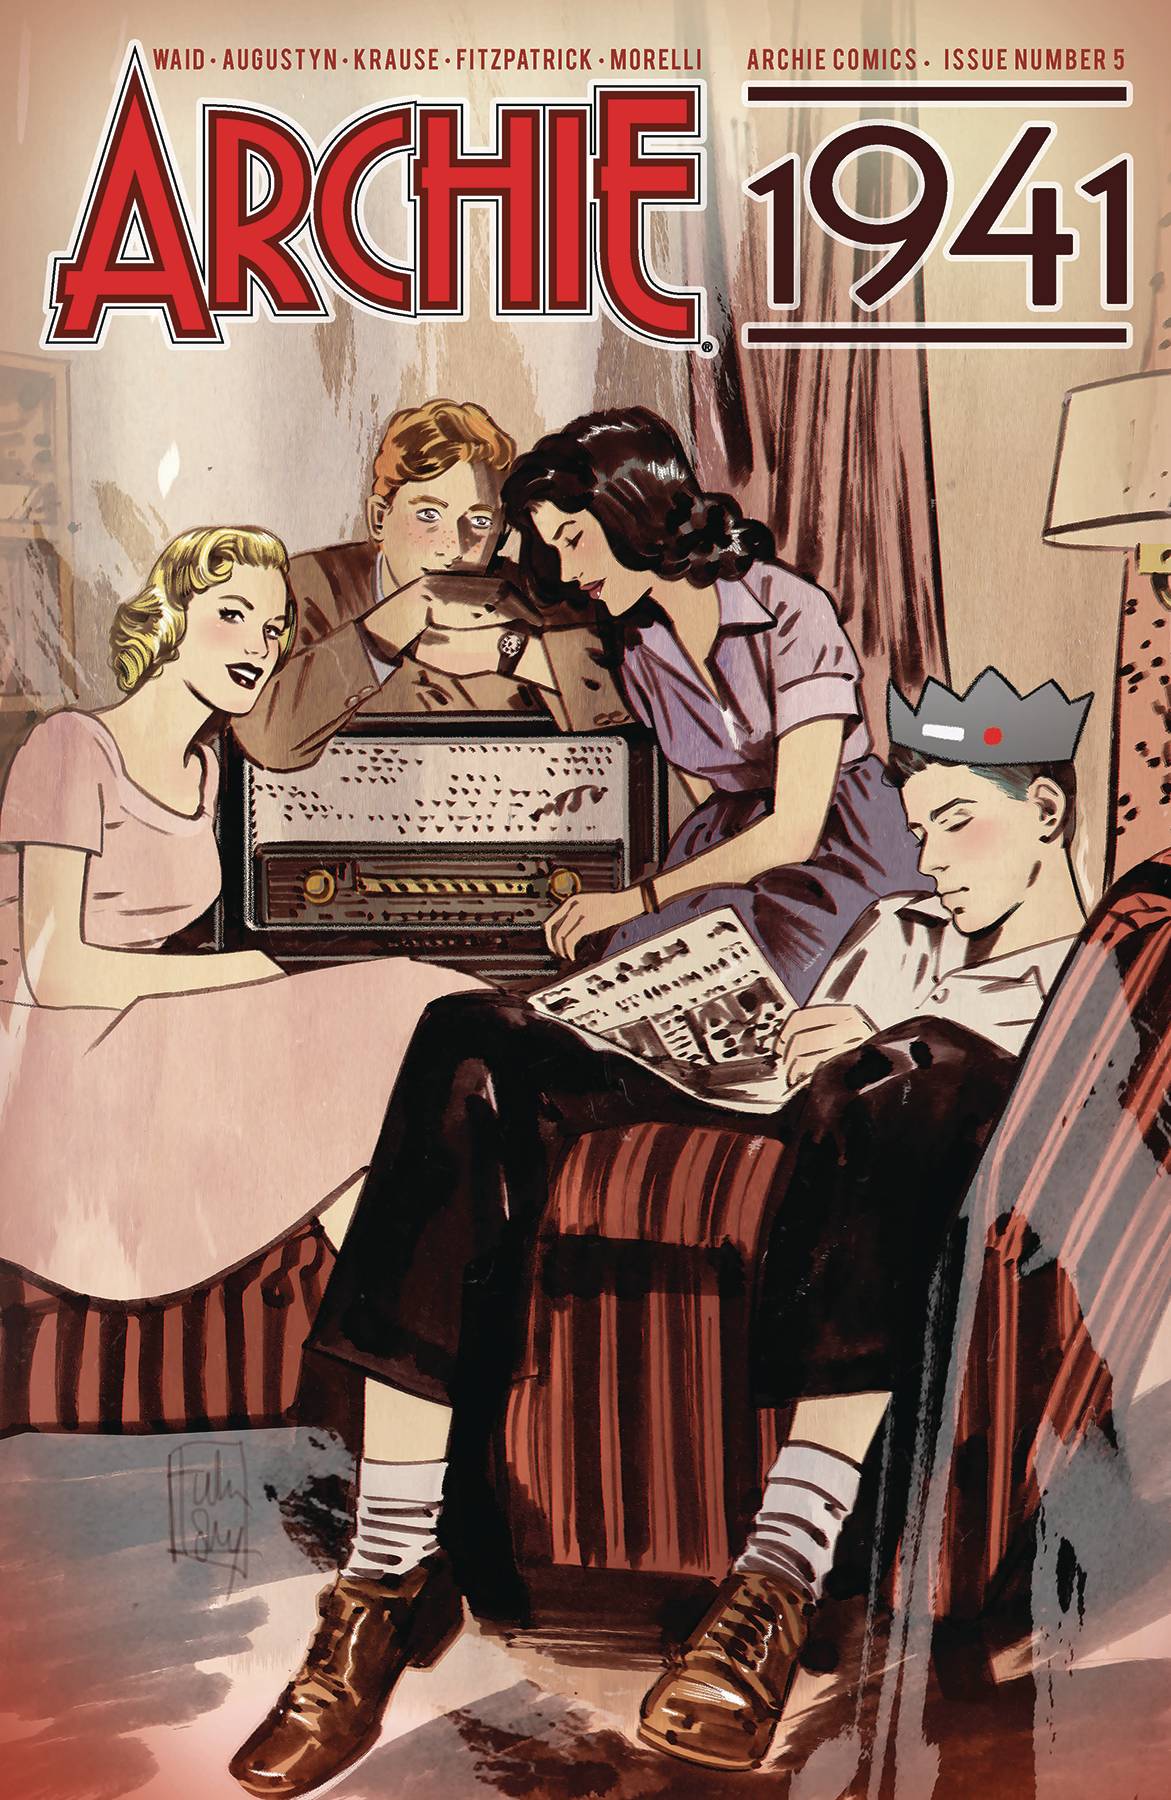 Archie 1941 #5 Cover C Ordway (Of 5)